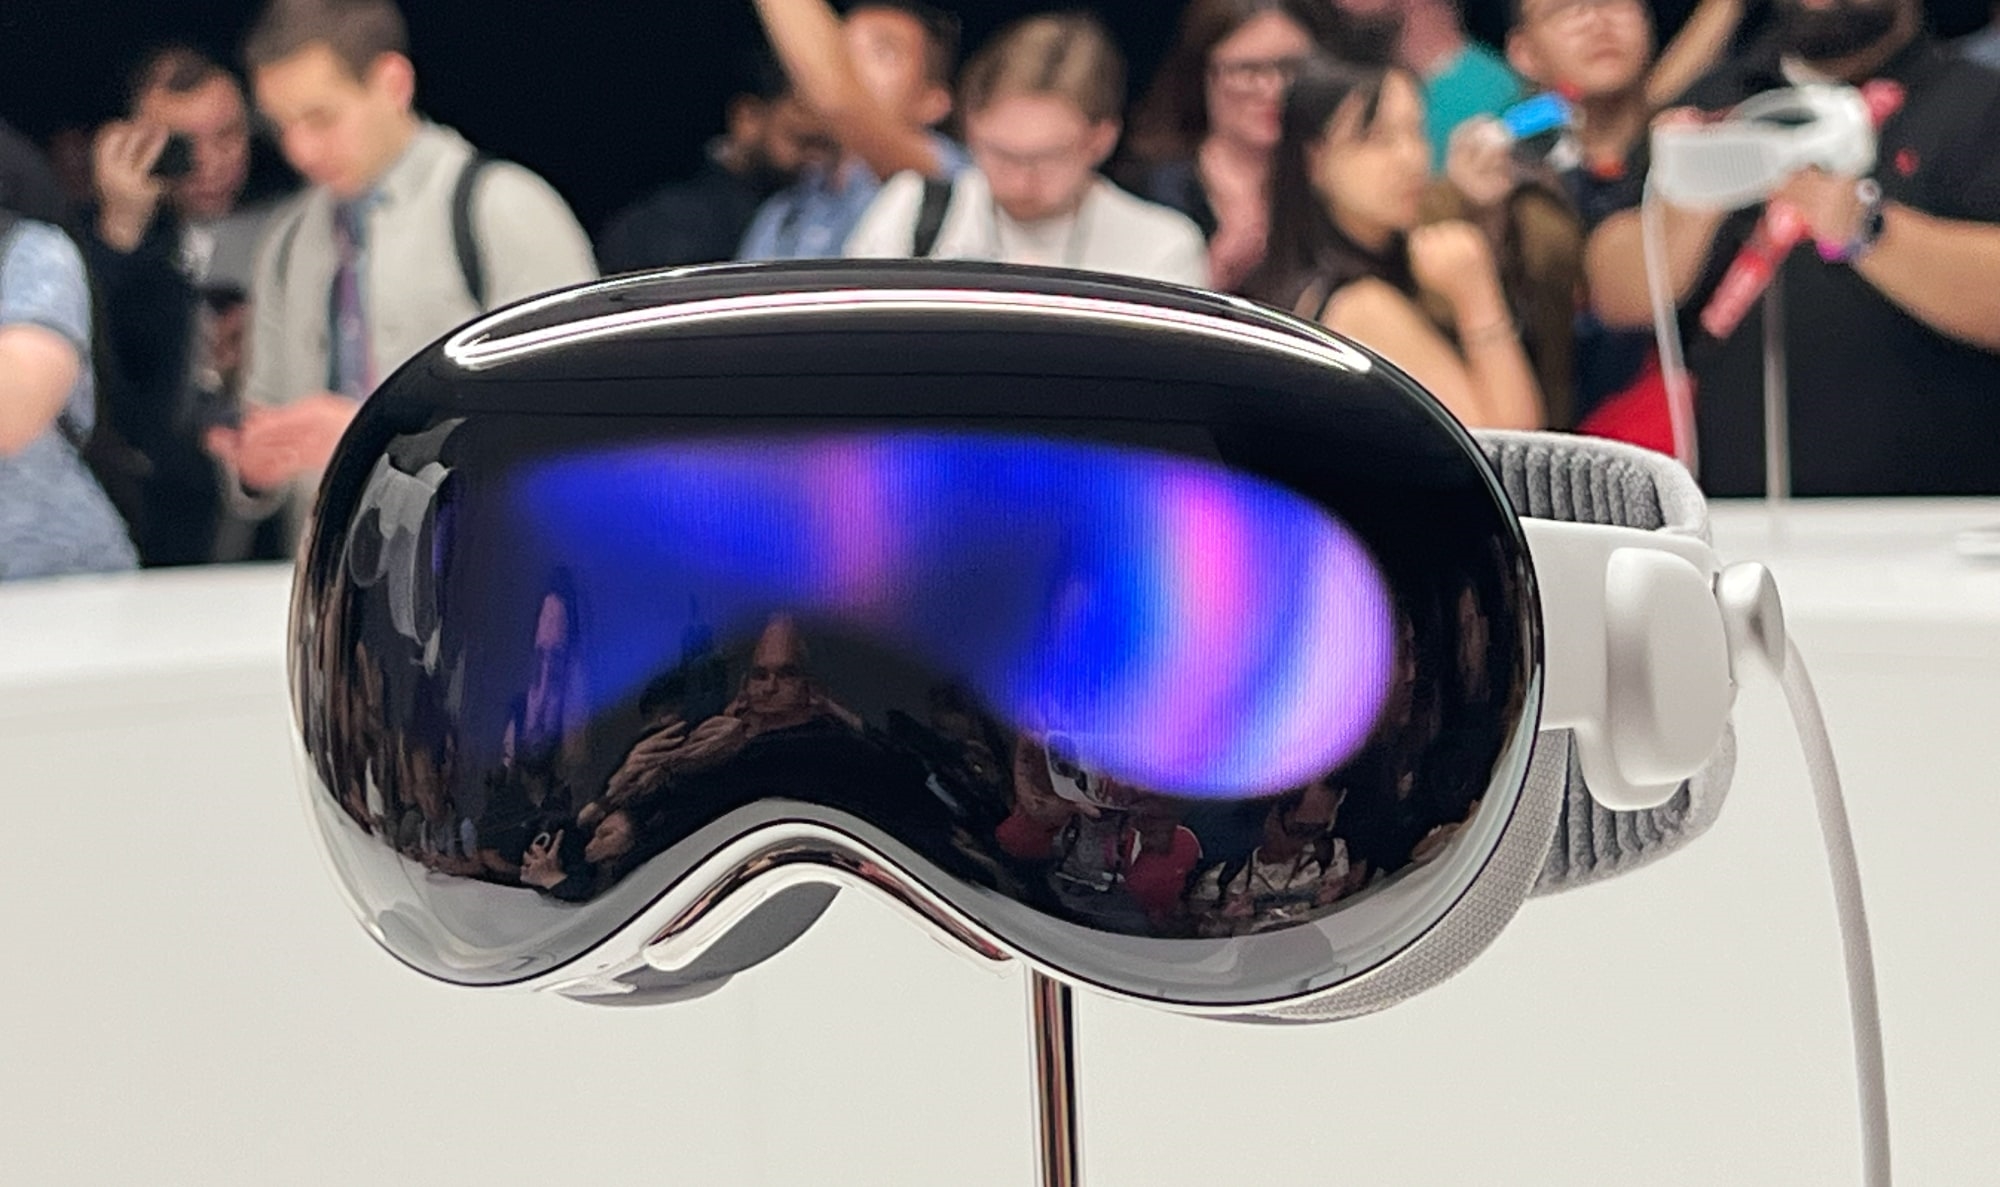 Apple Vision Pro hands-on: A new milestone for mixed reality, but issues remain | DeviceDaily.com